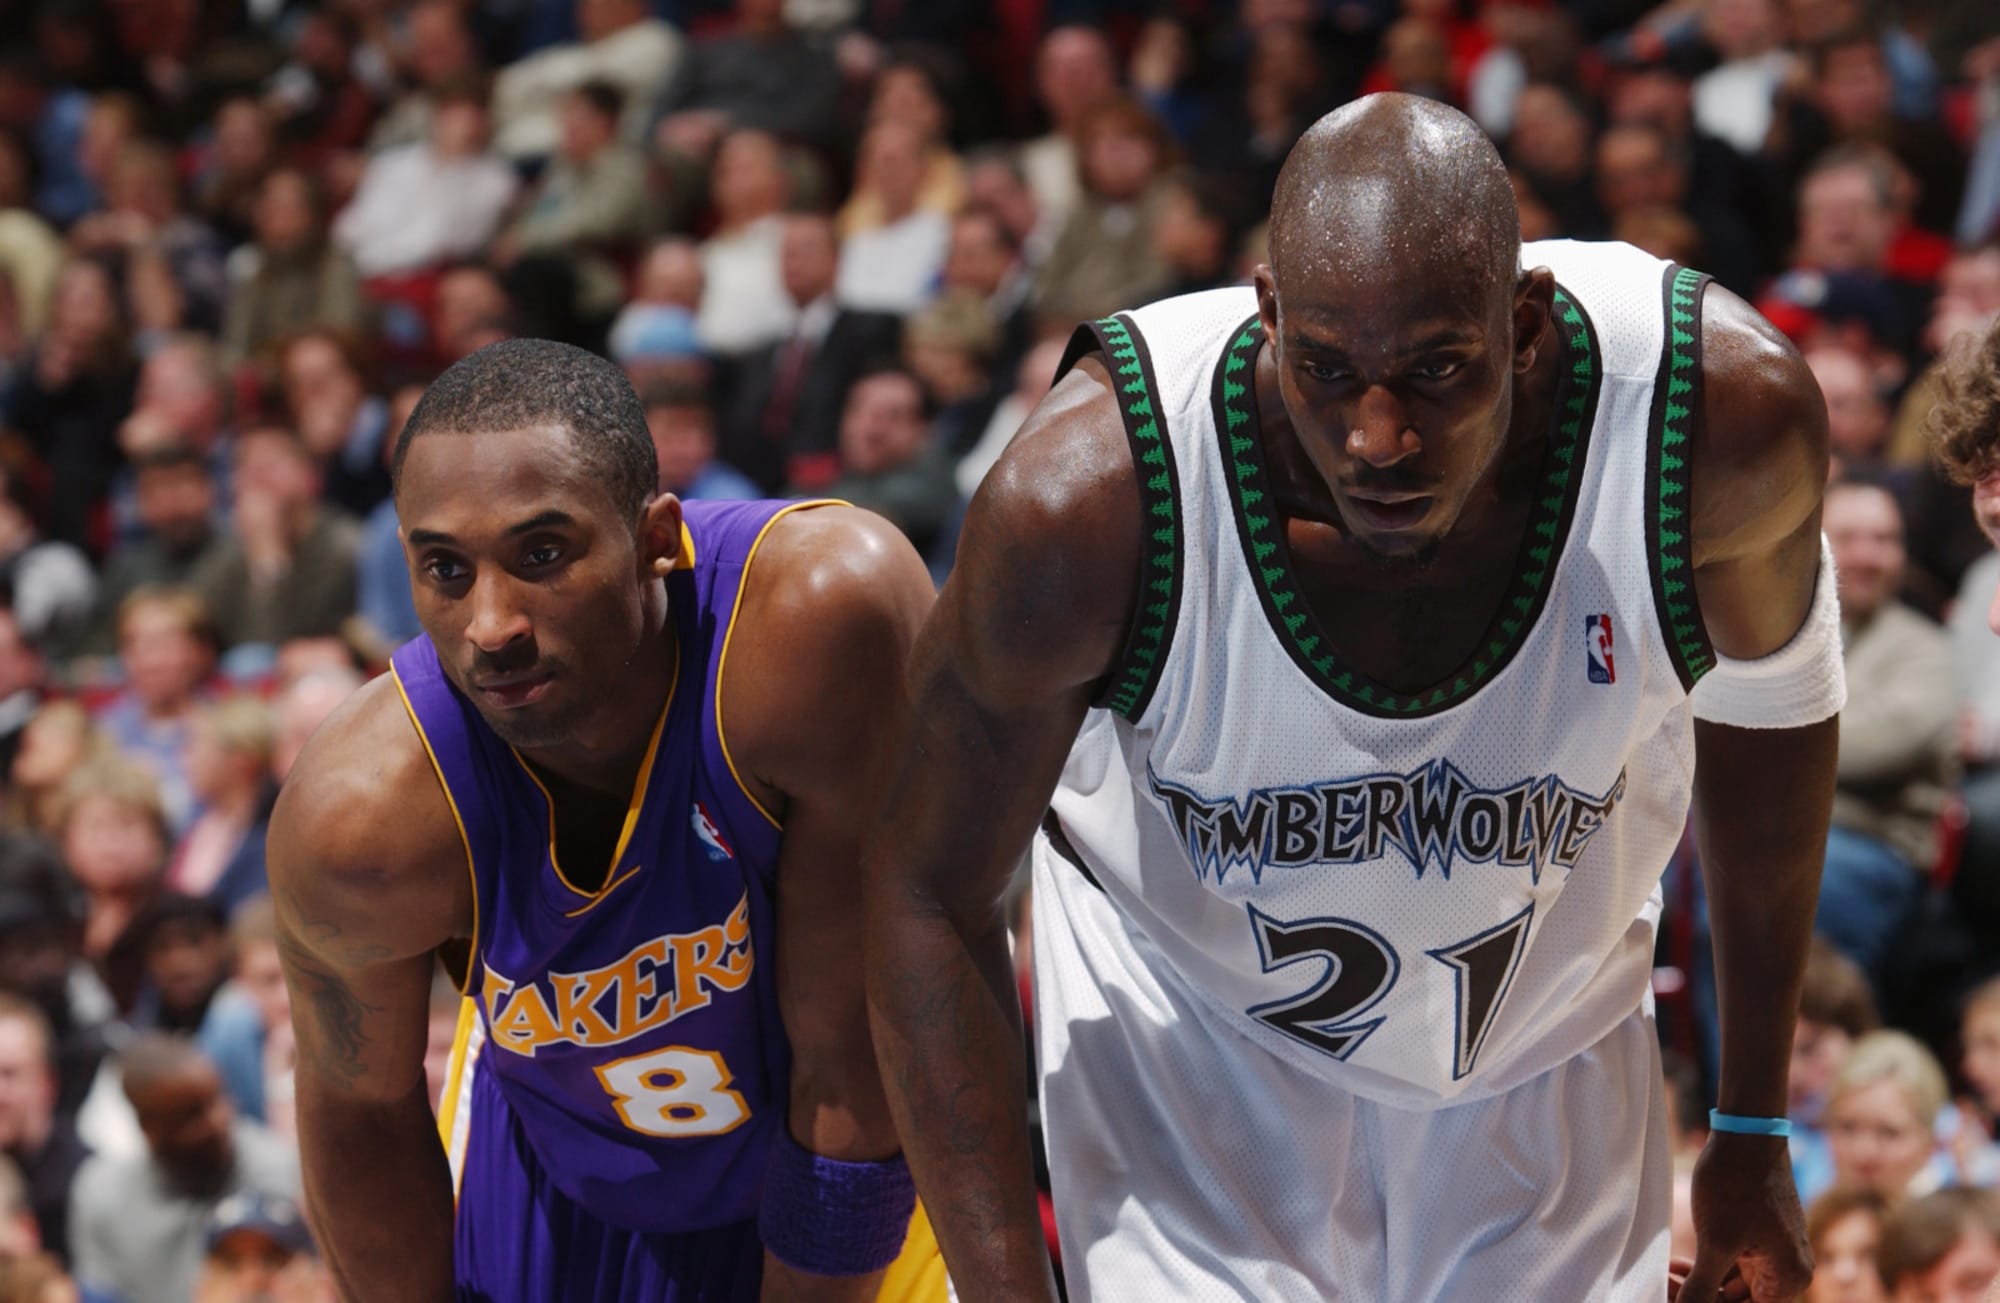 Kevin Garnett's last dunk - Duluth News Tribune  News, weather, and sports  from Duluth, Minnesota